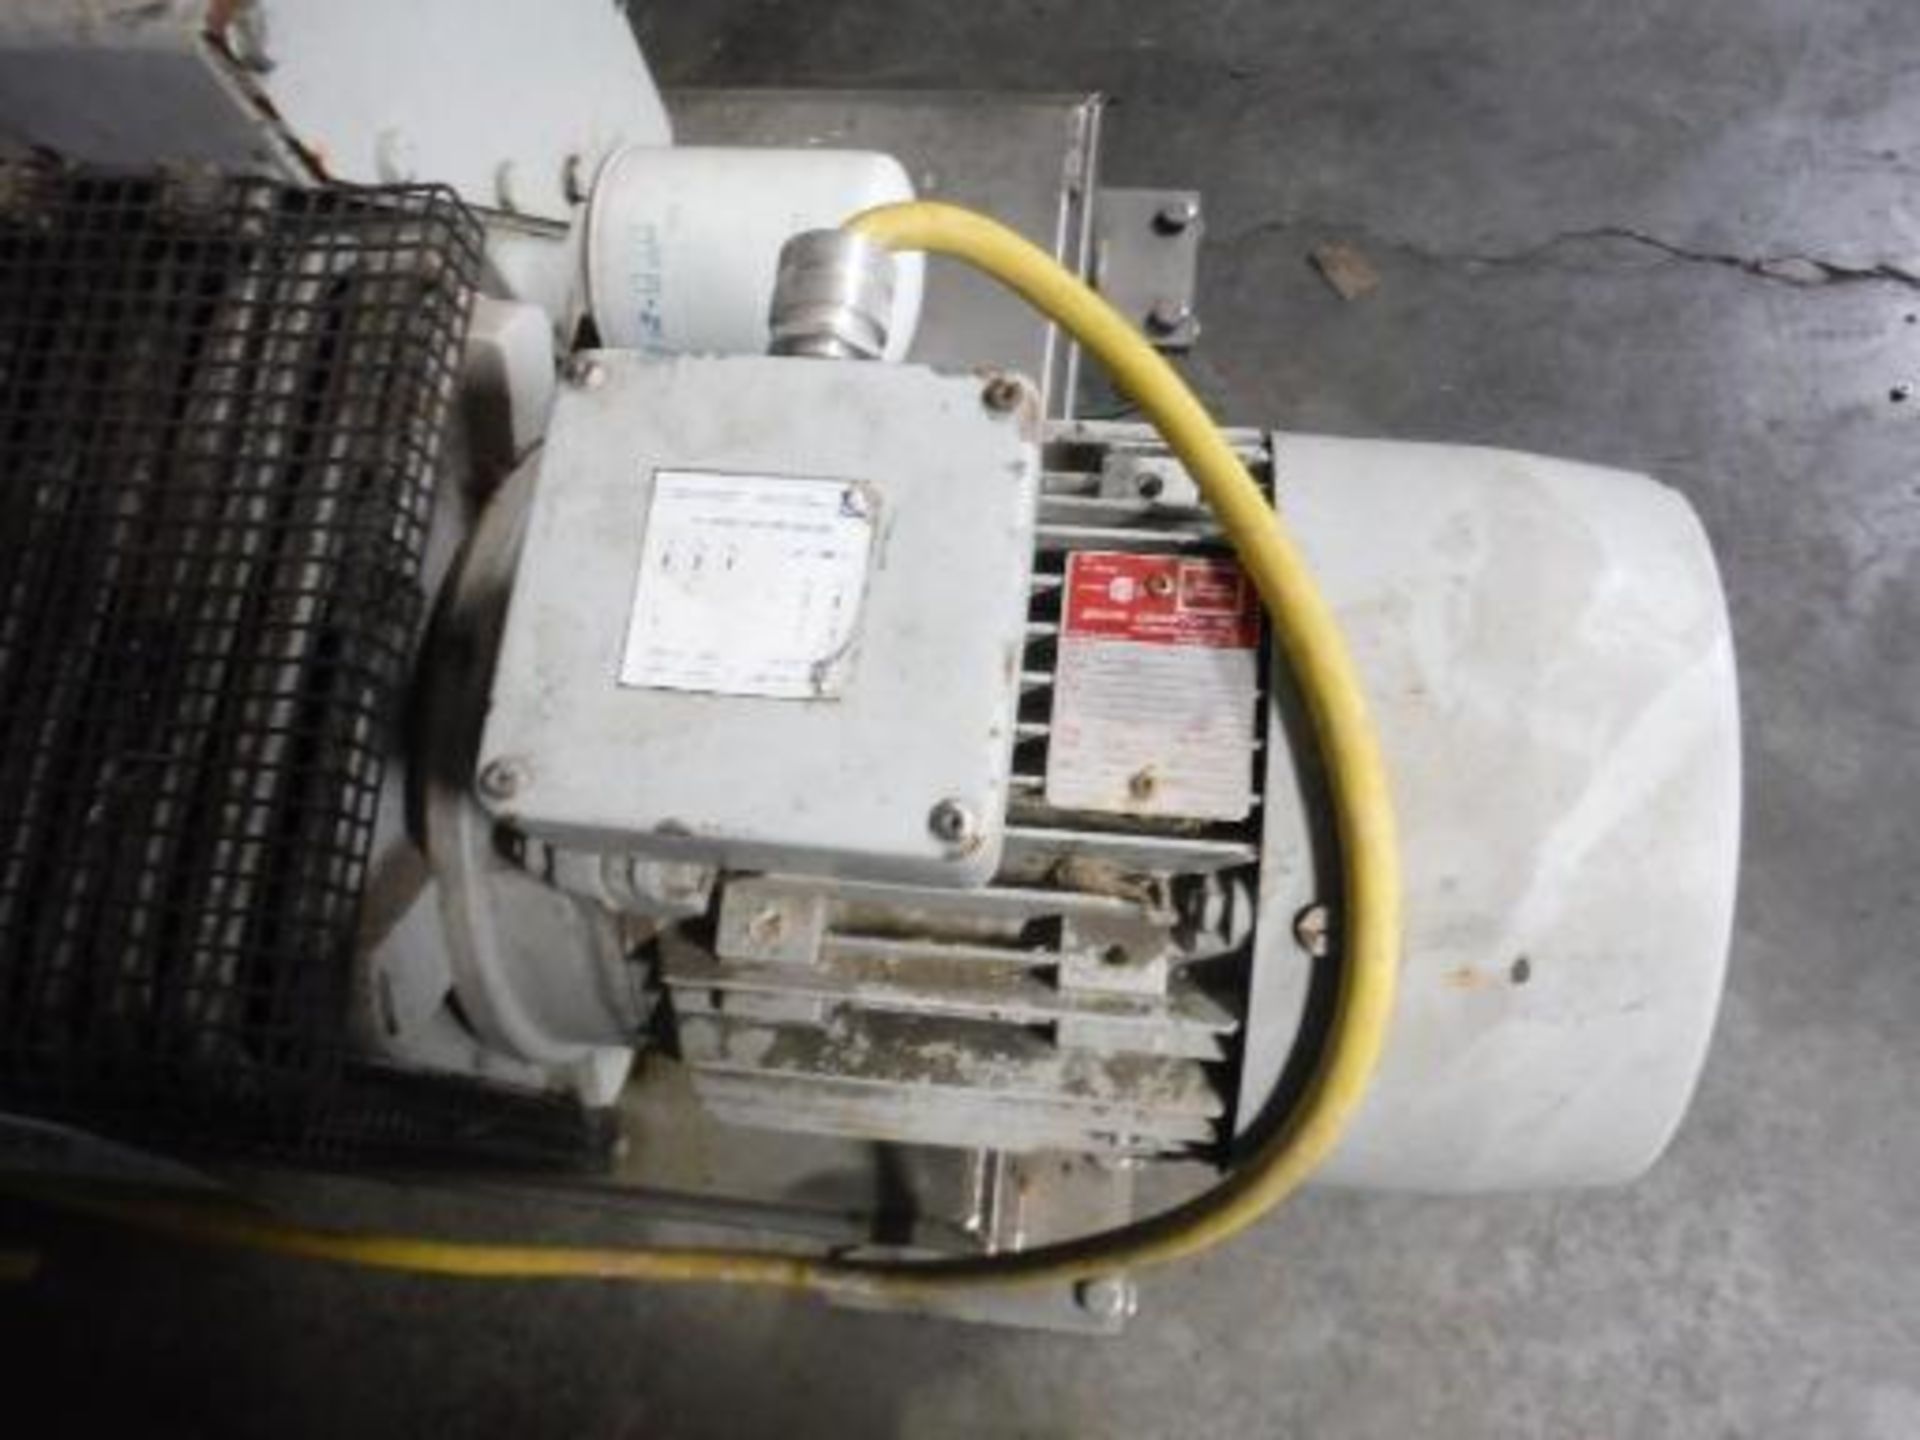 1995 Leybold vacuum pump on cart, Model SV200 950 27 49, SN J95 11 00014, with 7.5 HP motor This - Image 4 of 5